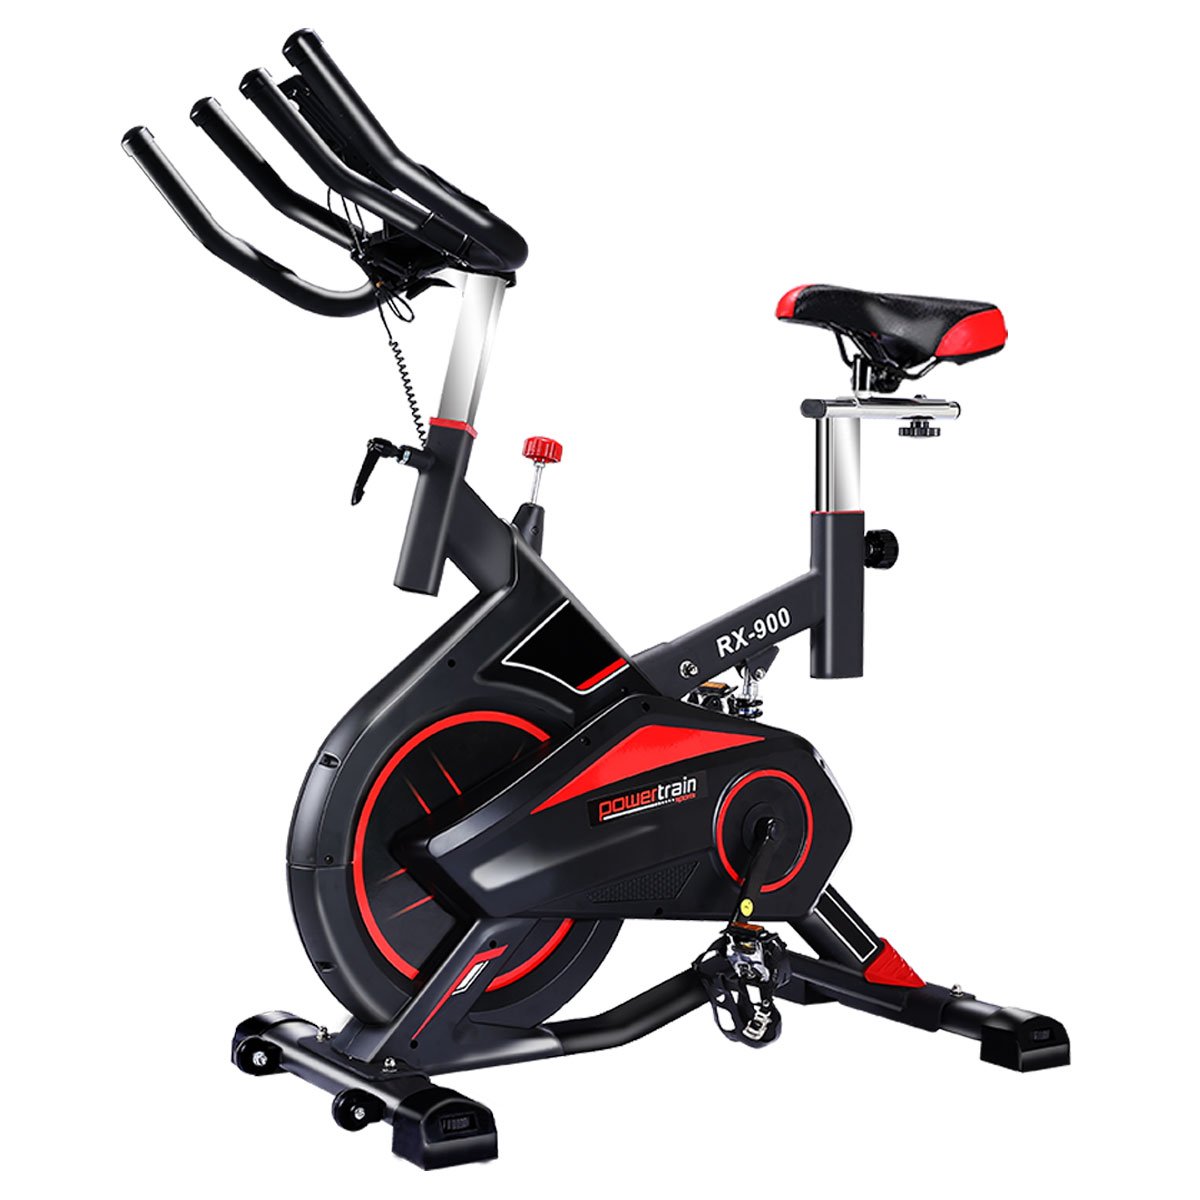 Powertrain RX-900 Exercise Spin Bike Cardio Cycling - Red 1